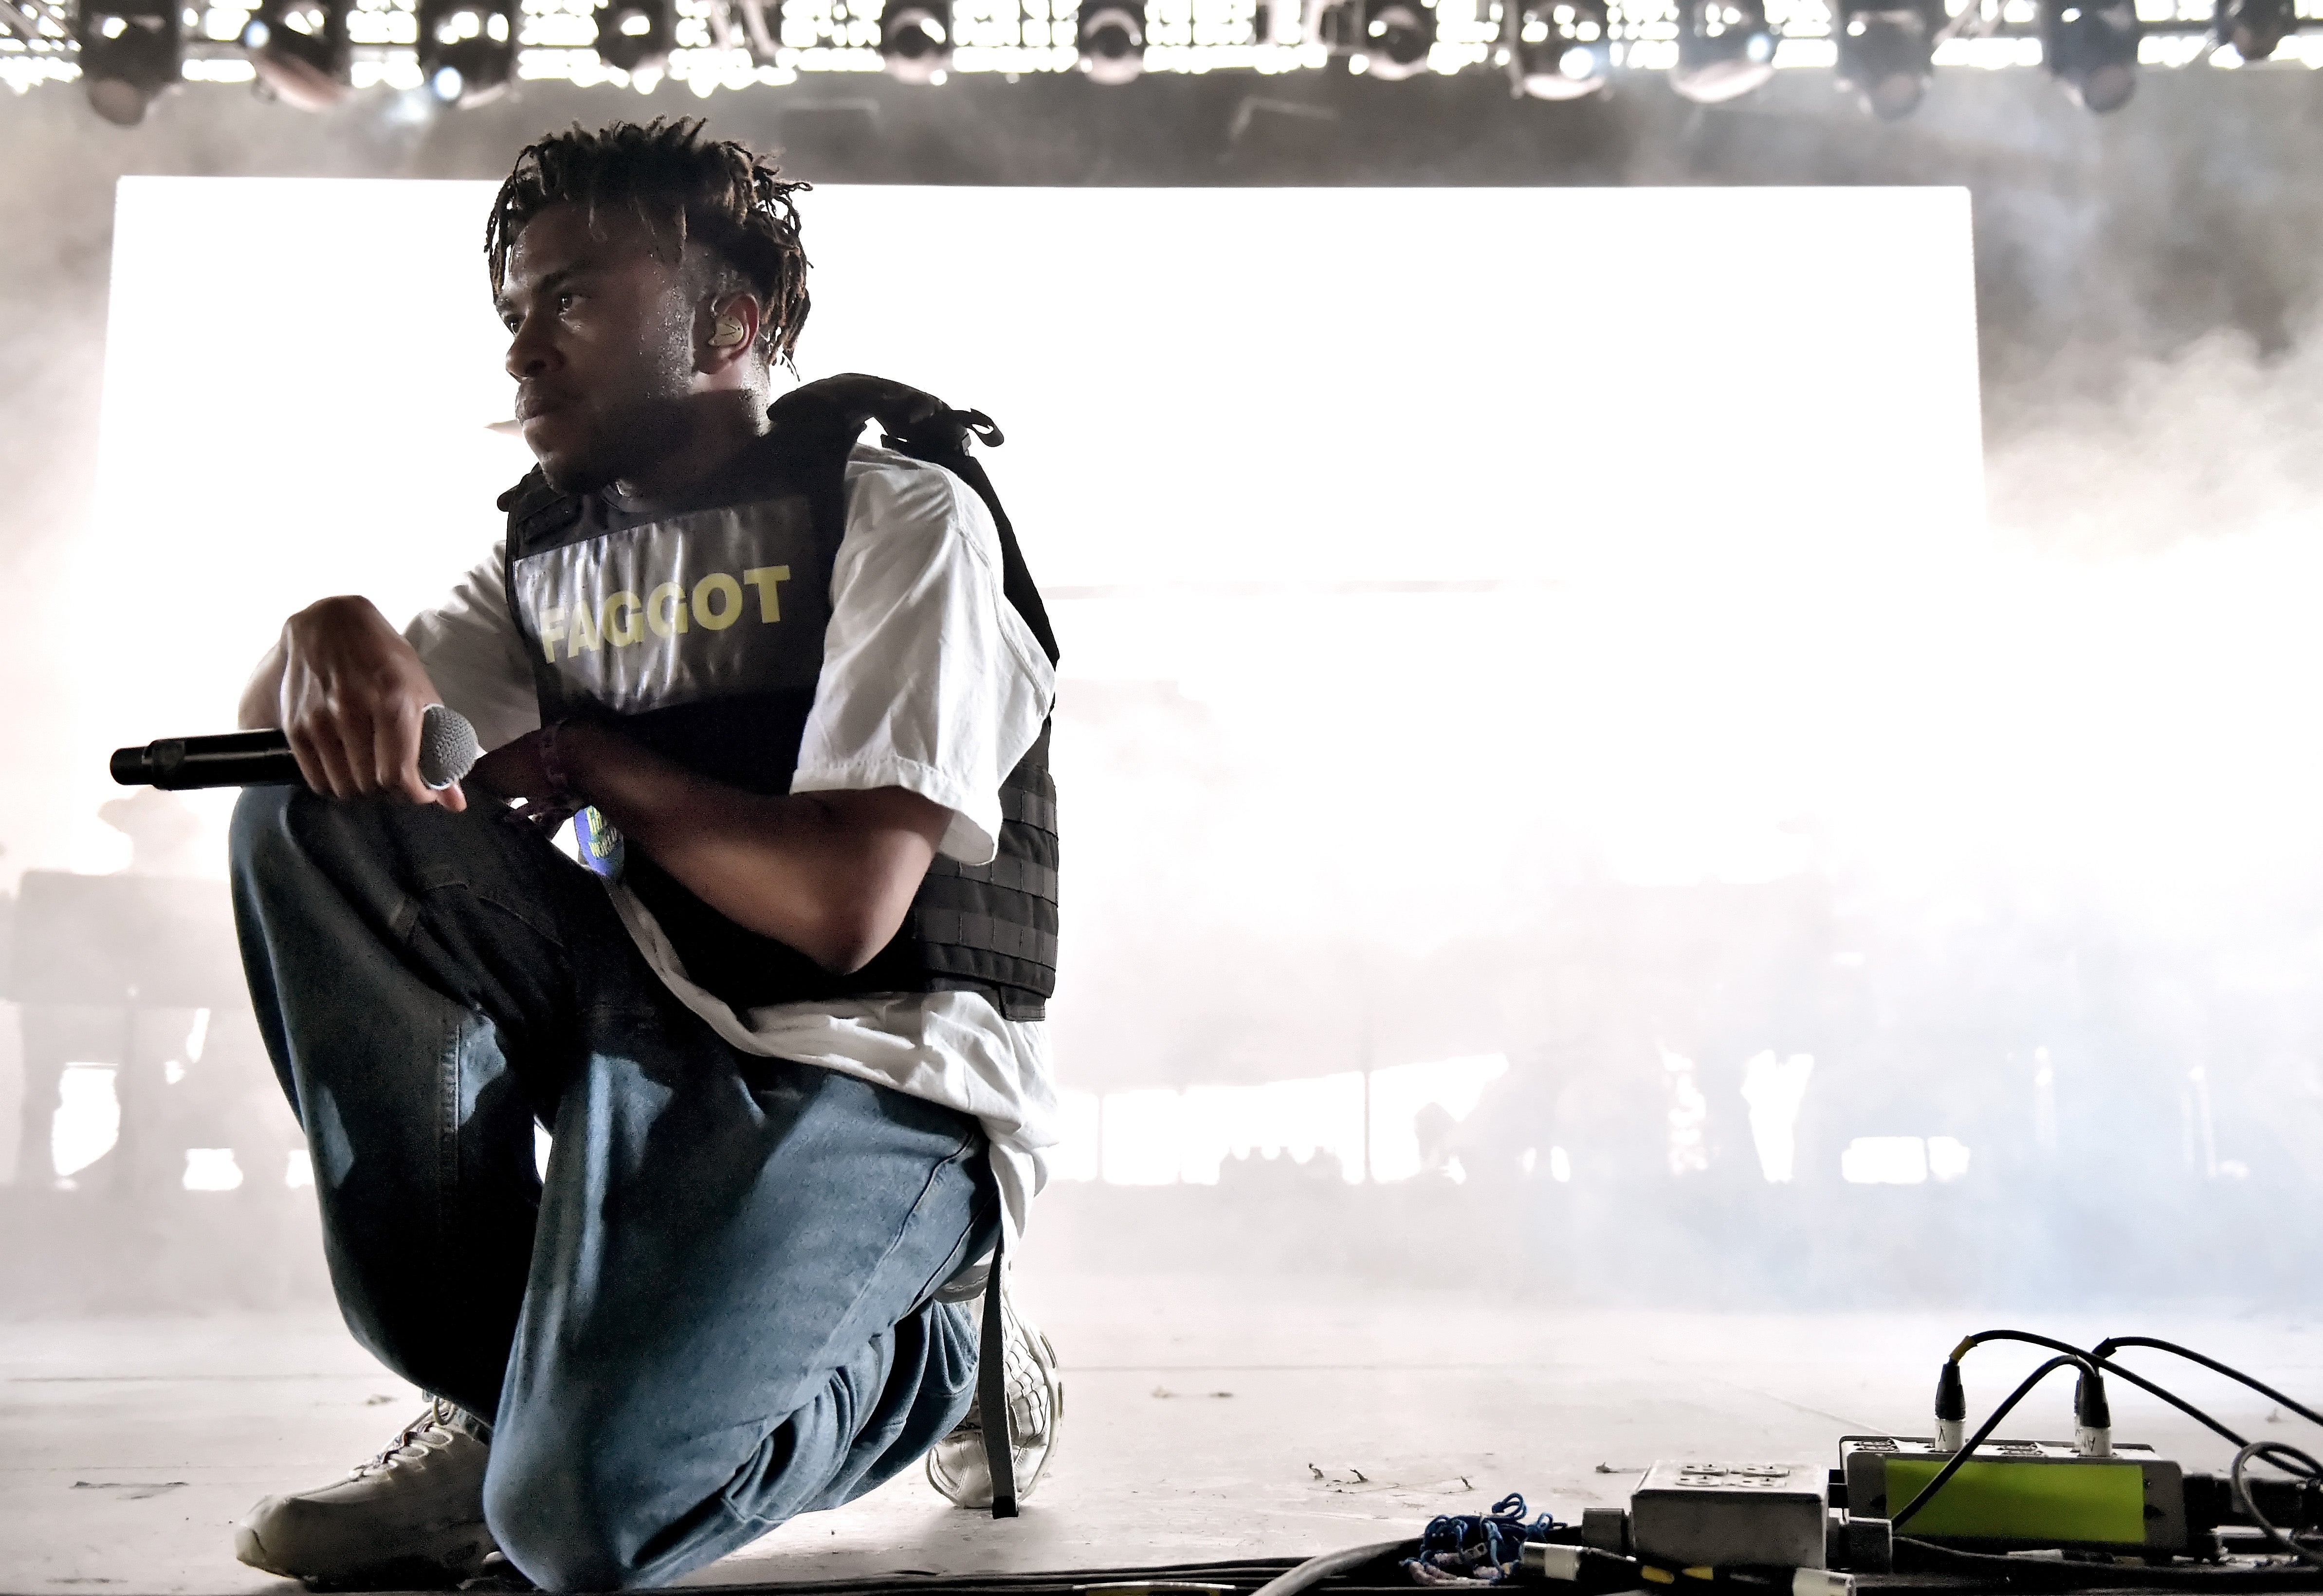 BROCKHAMPTON frontman Kevin Abstract during a past Coachella show